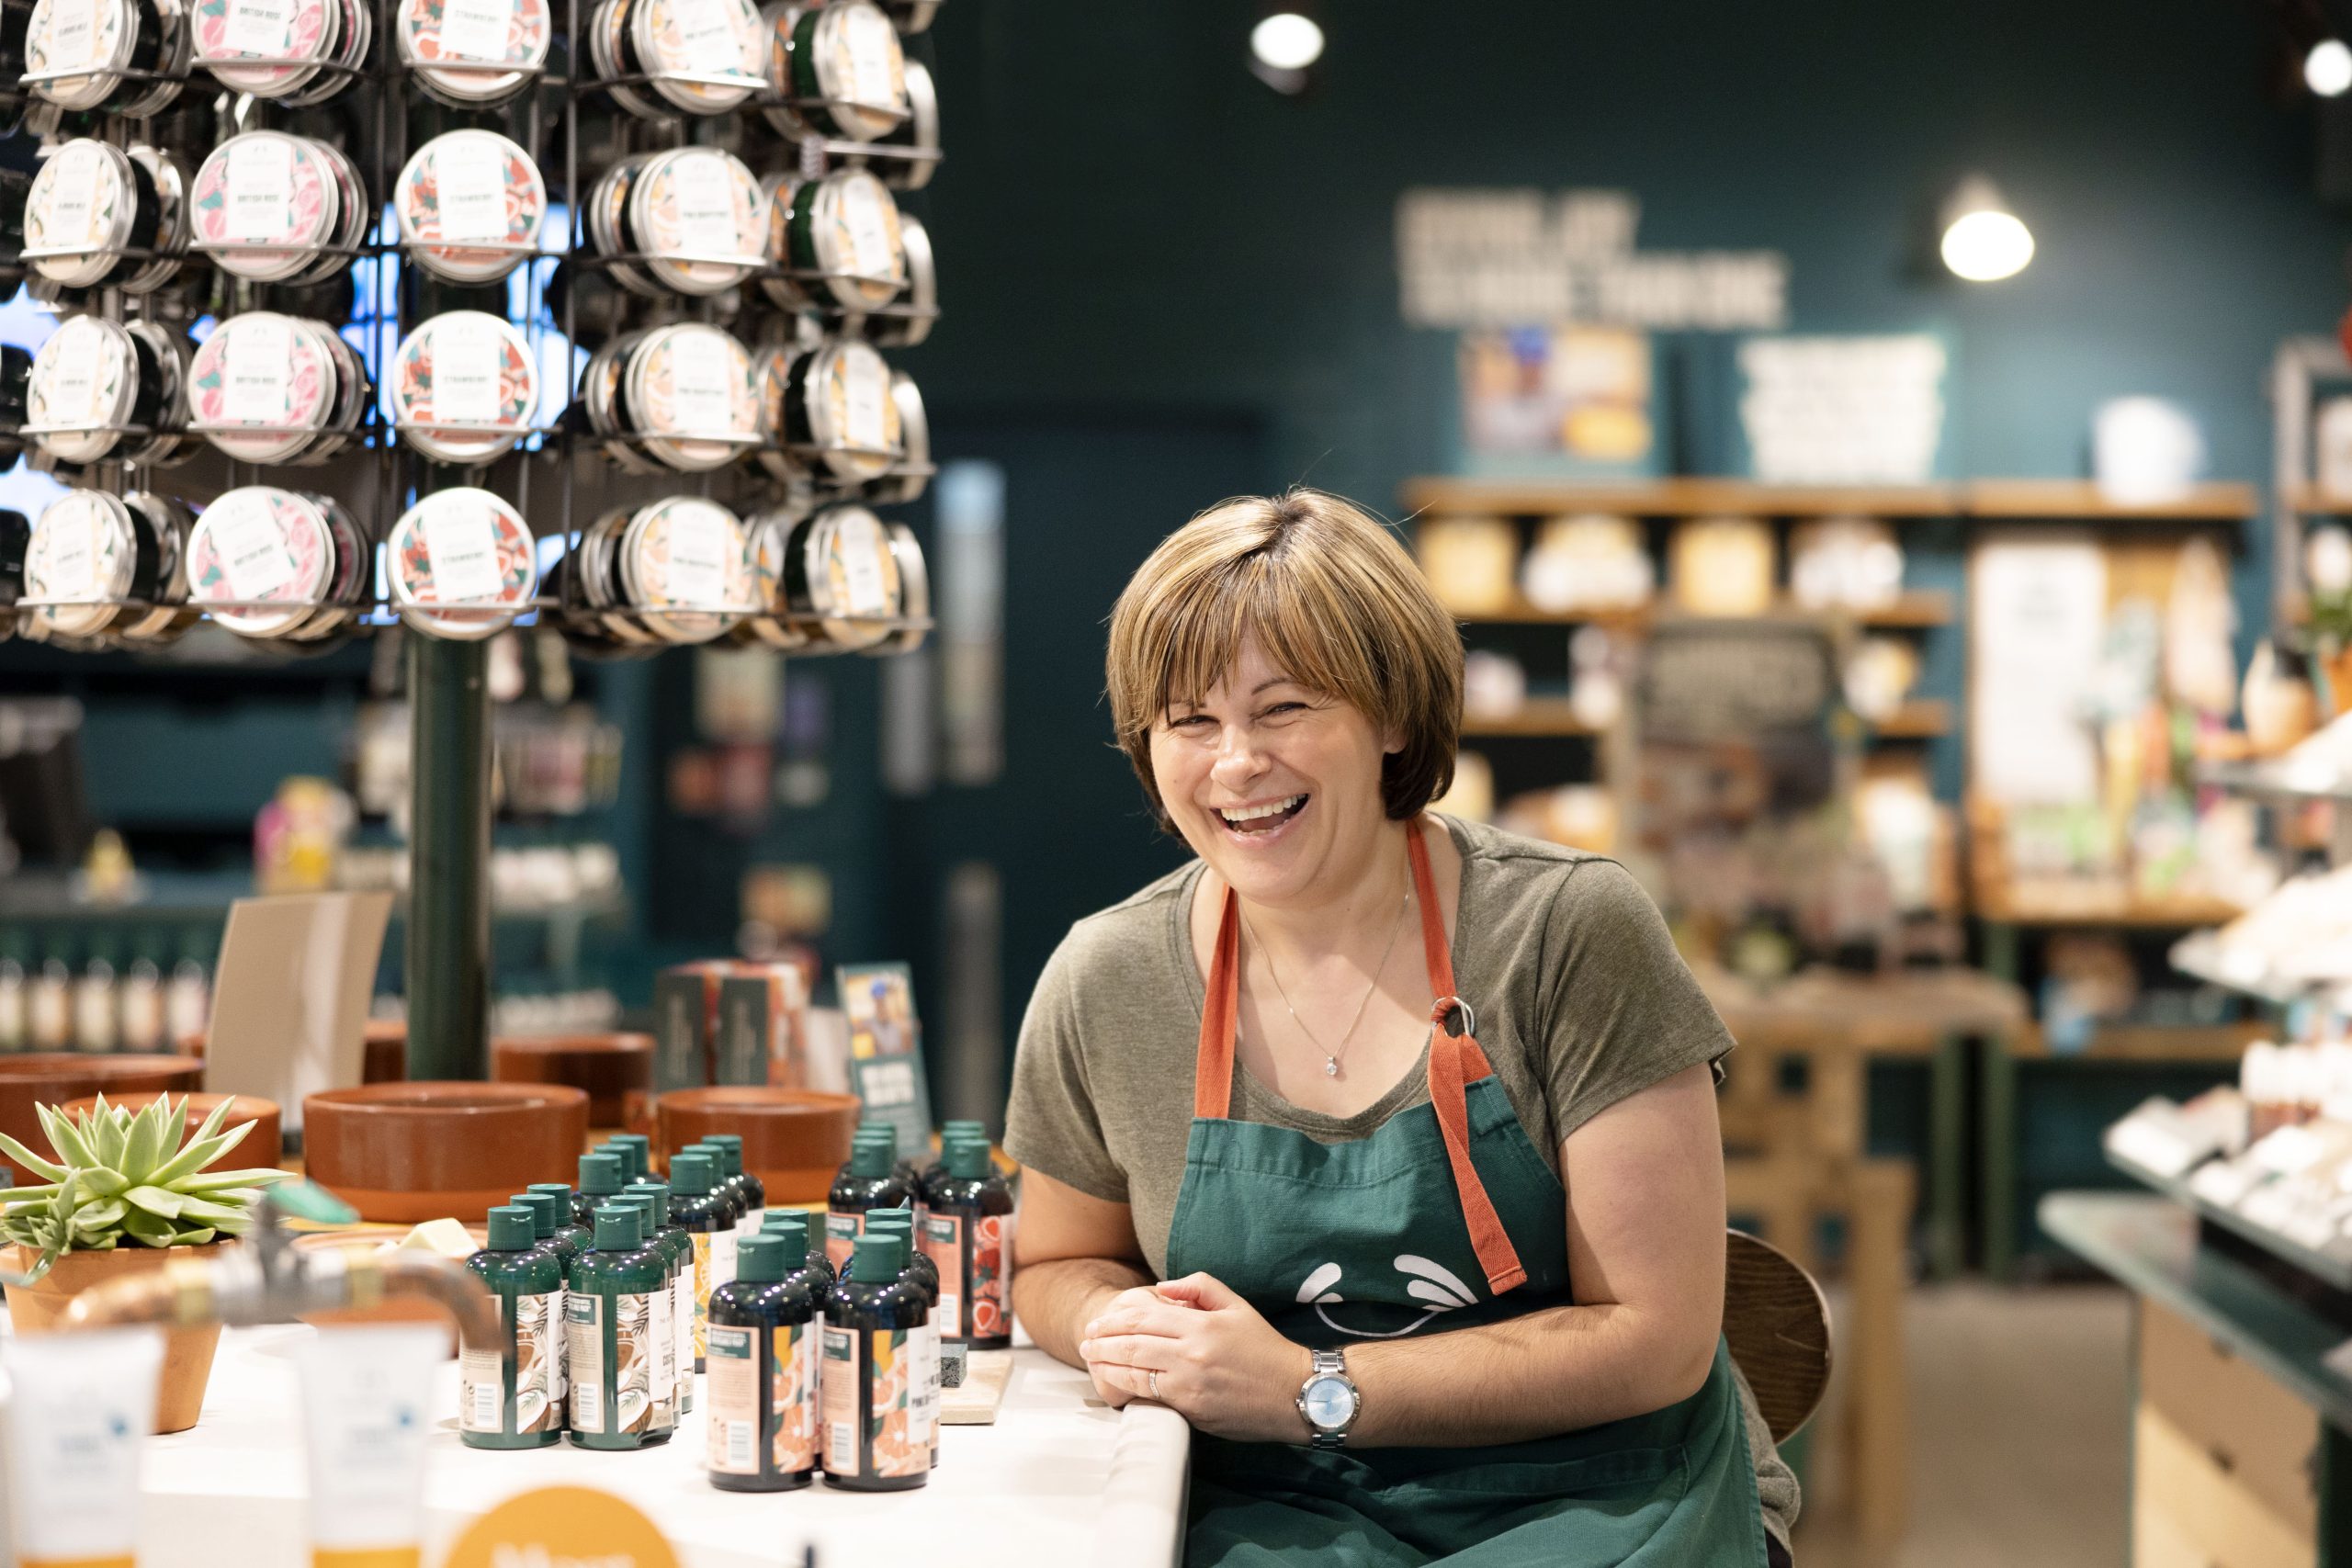 7 Sustainability tips from The Body Shop | Silverburn Shopping Centre